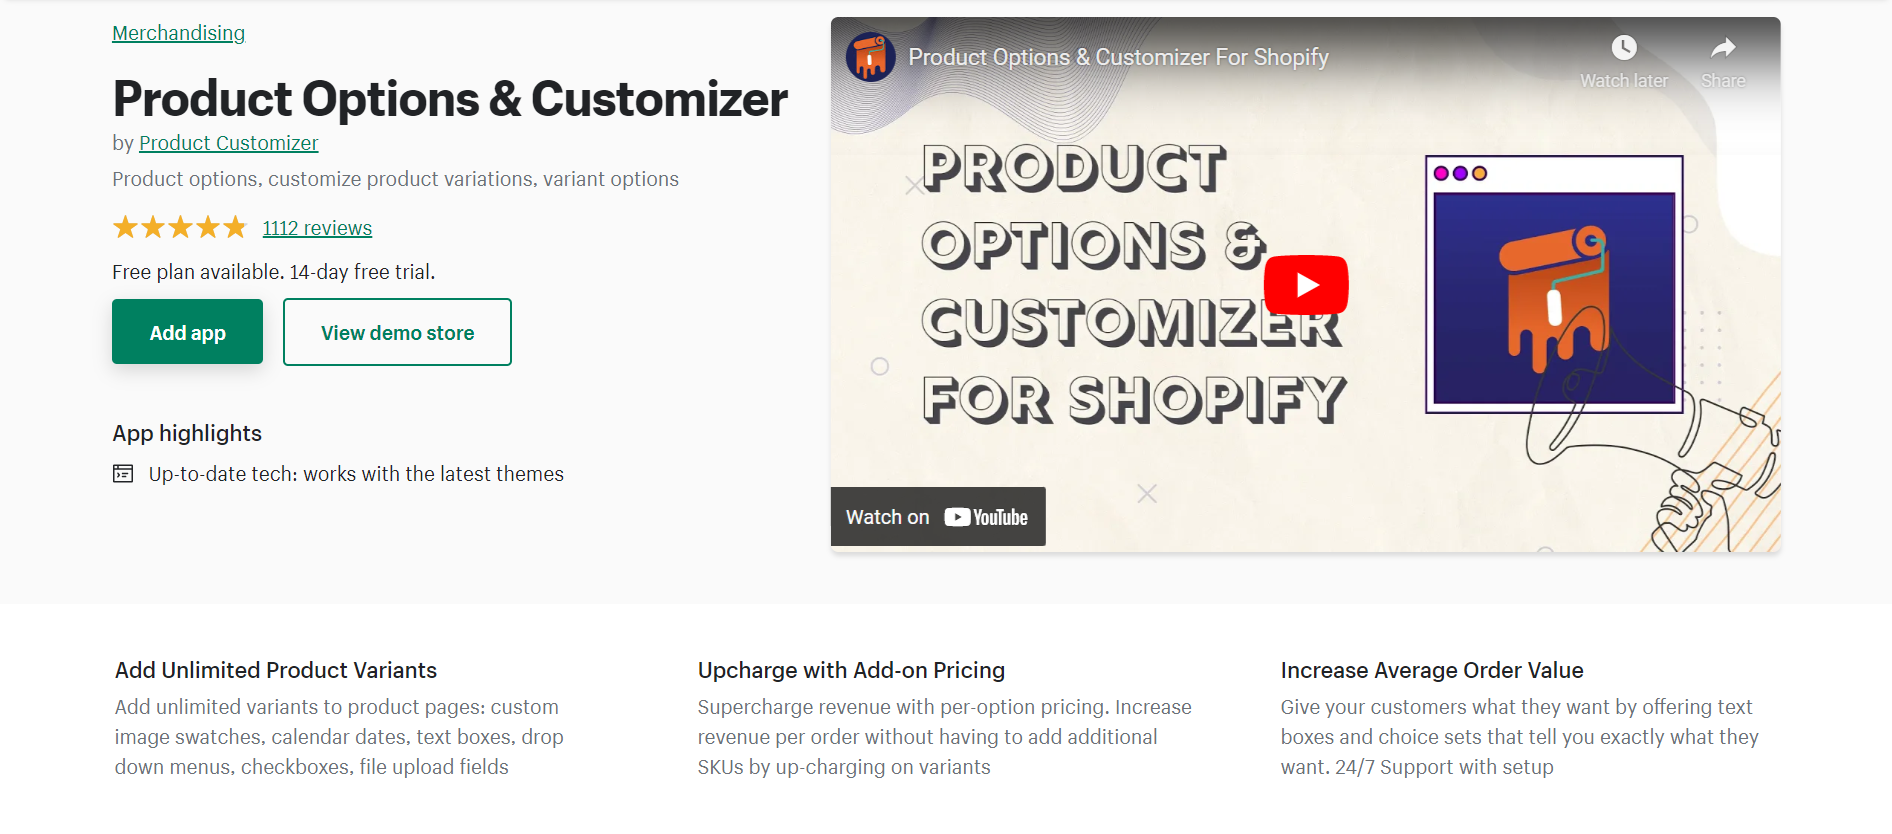 Product Options and Customizer